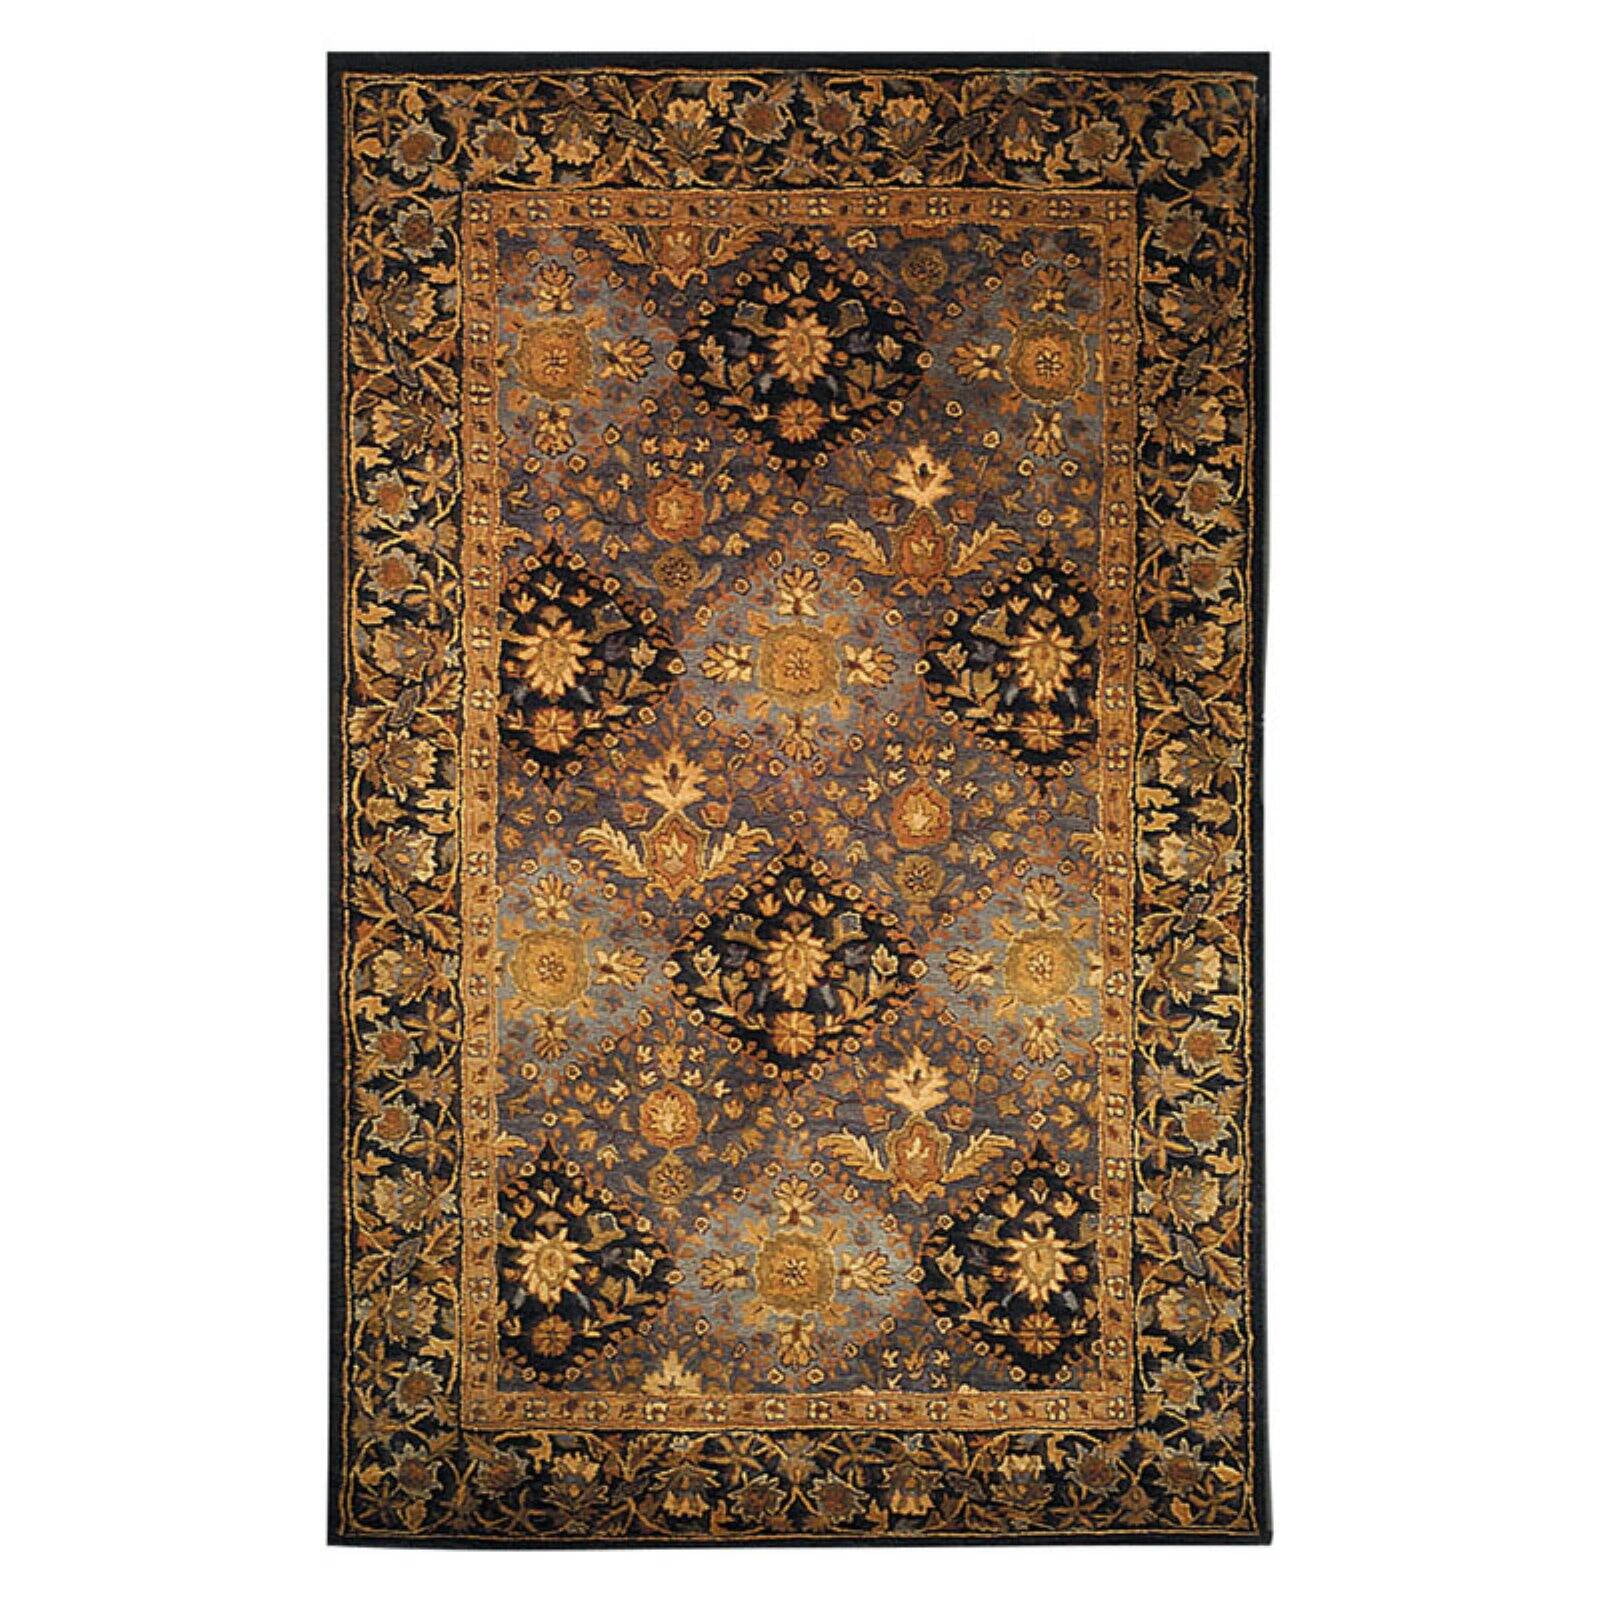 Blue Safavieh Antiquity Collection AT57A Handmade Traditional Oriental Premium Wool Runner 2'3 x 12' 